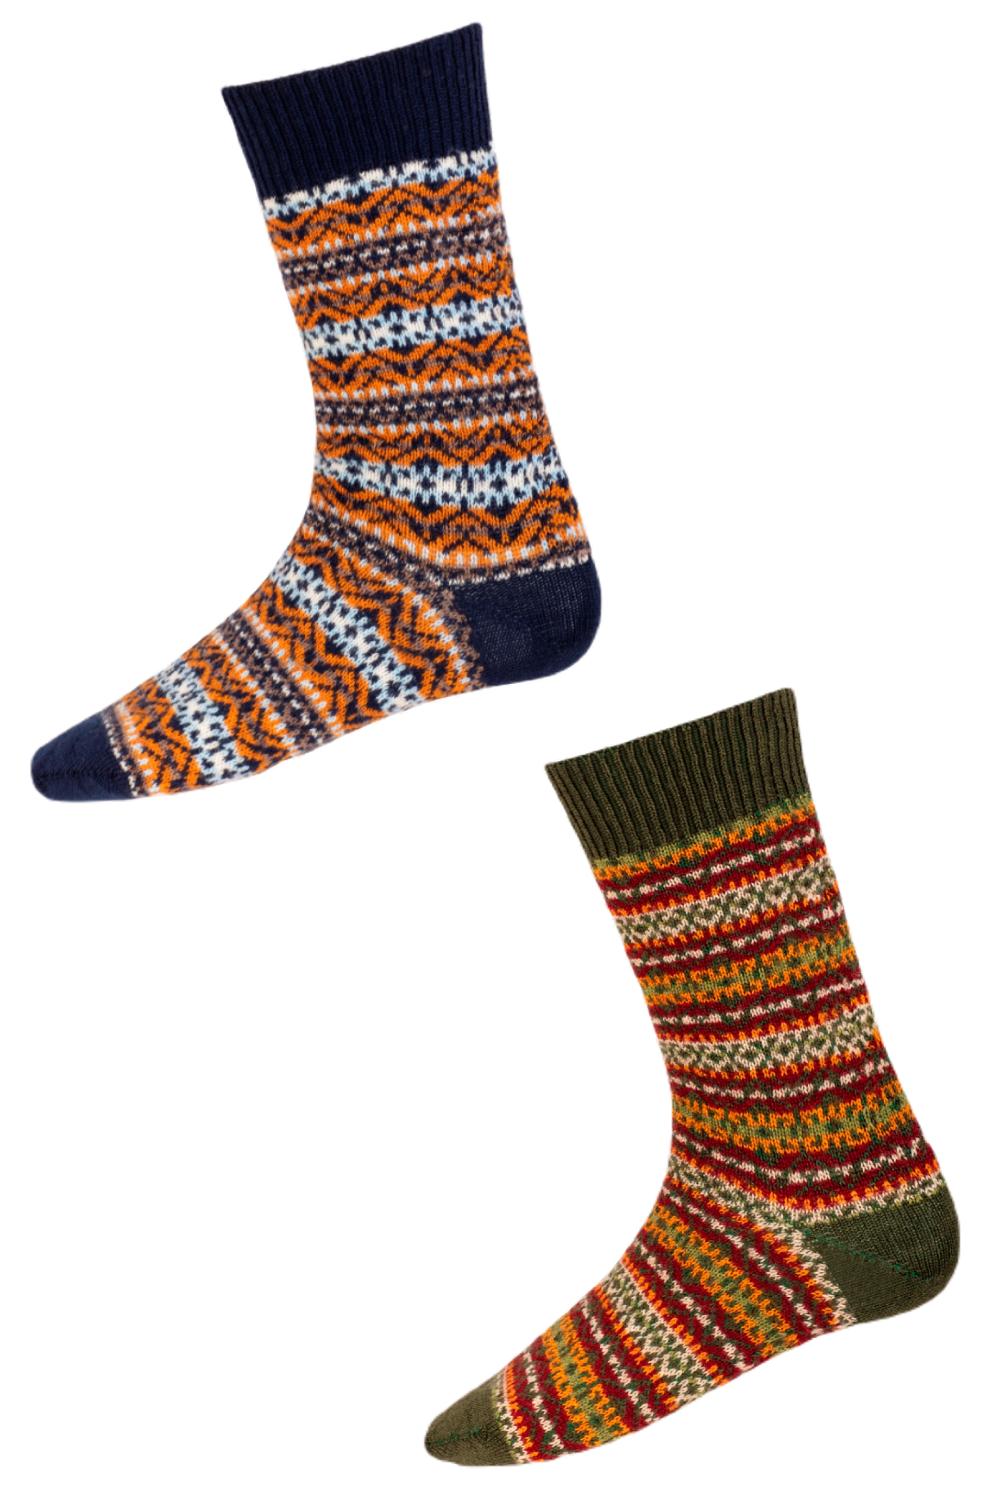 House Of Cheviot Fairsle Short Socks In Navy and Spruce